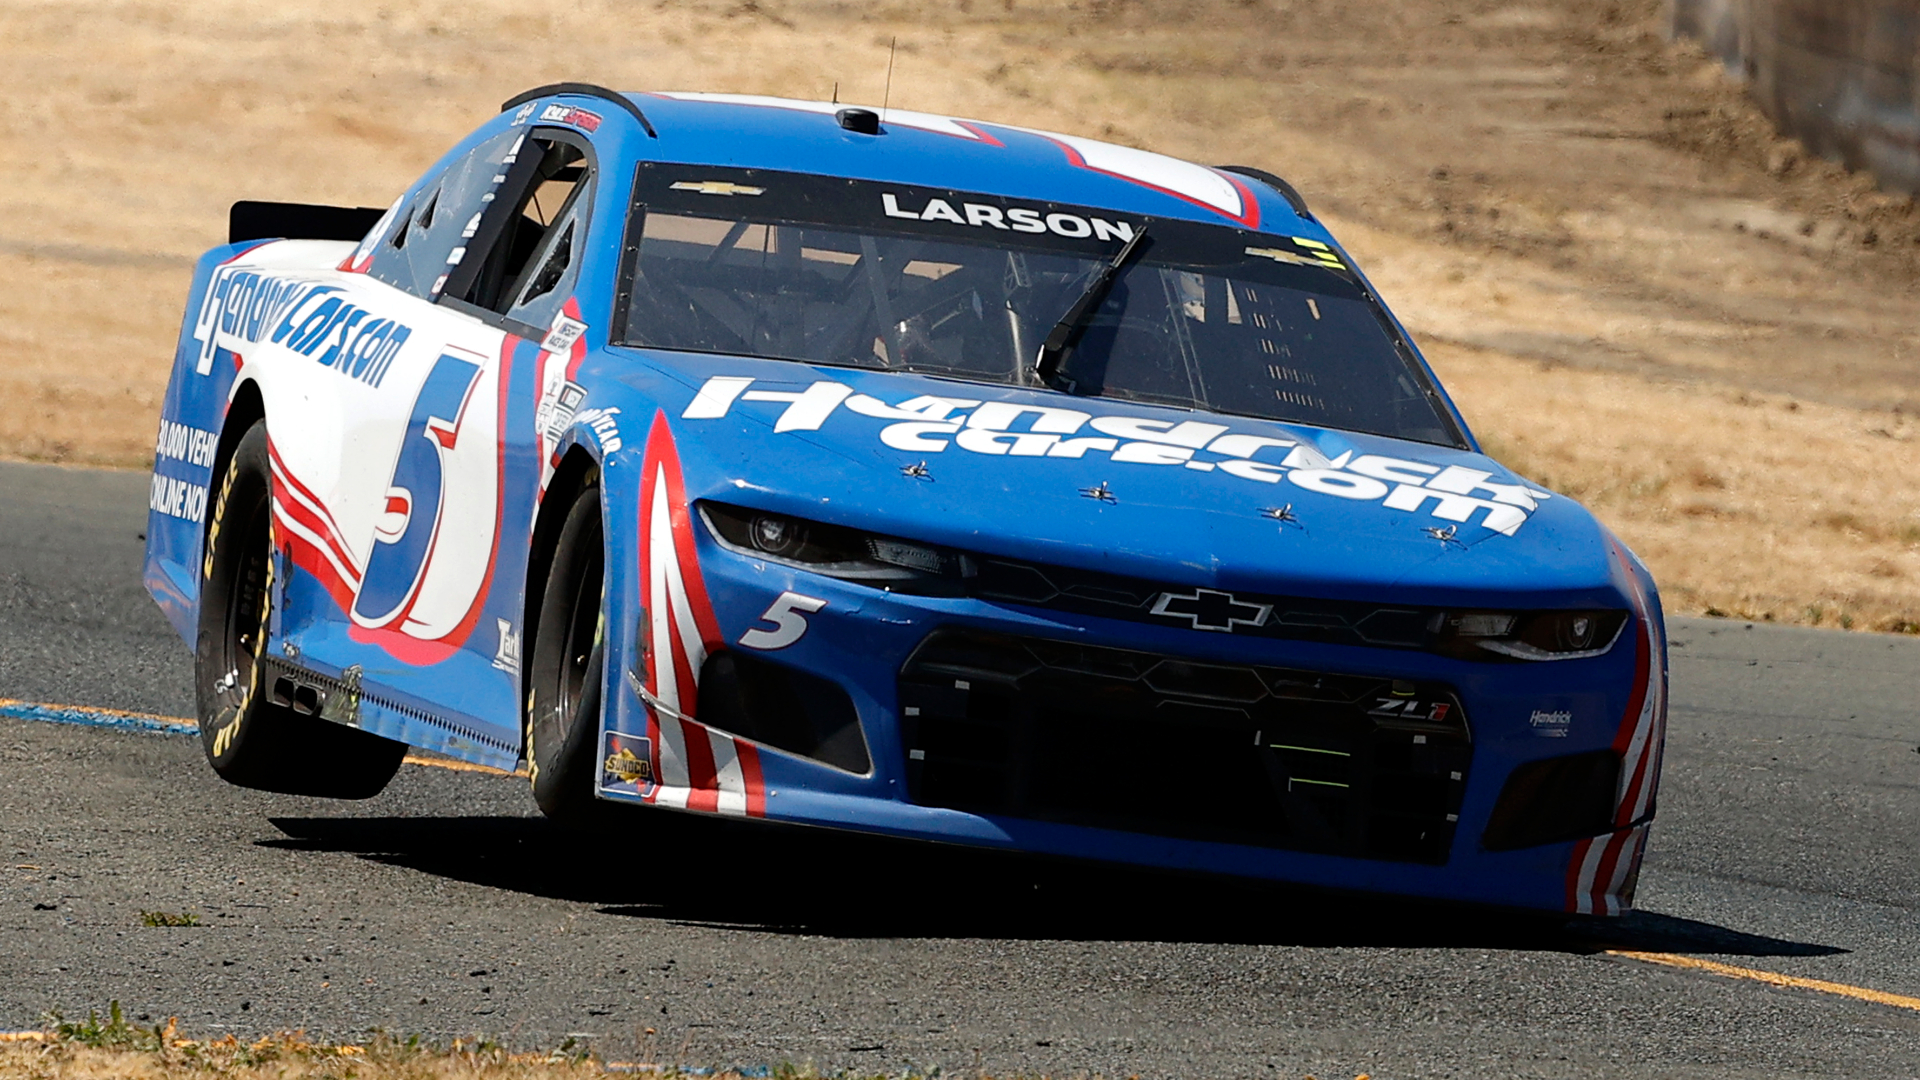 NASCAR at Sonoma race, results, highlights: Kyle Larson wins second straight at Toyota Save Mart 350